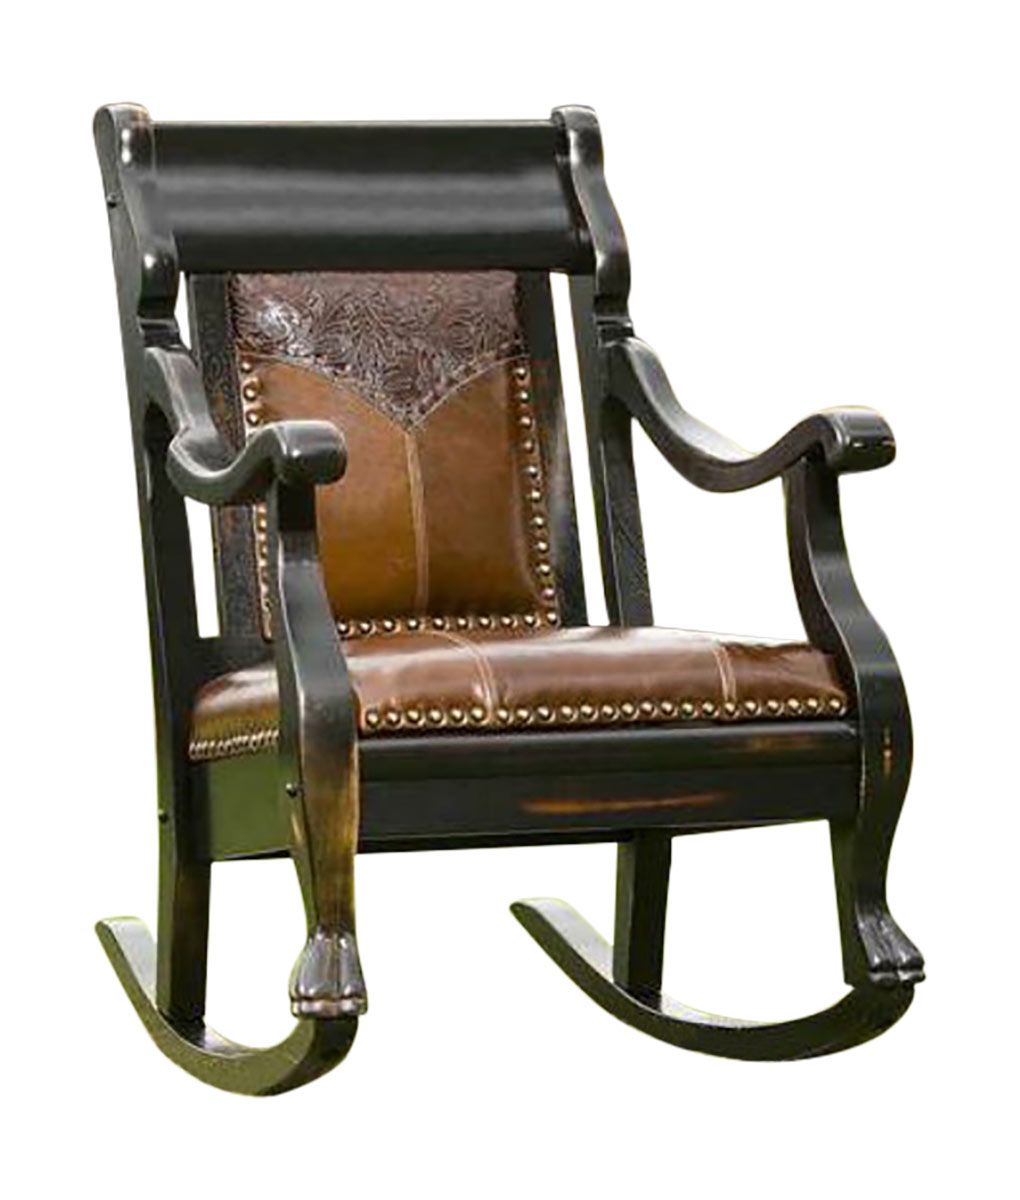 Vintage Rocker With Embossed Yoke Intended For Tobacco Rocking Chairs (View 20 of 20)